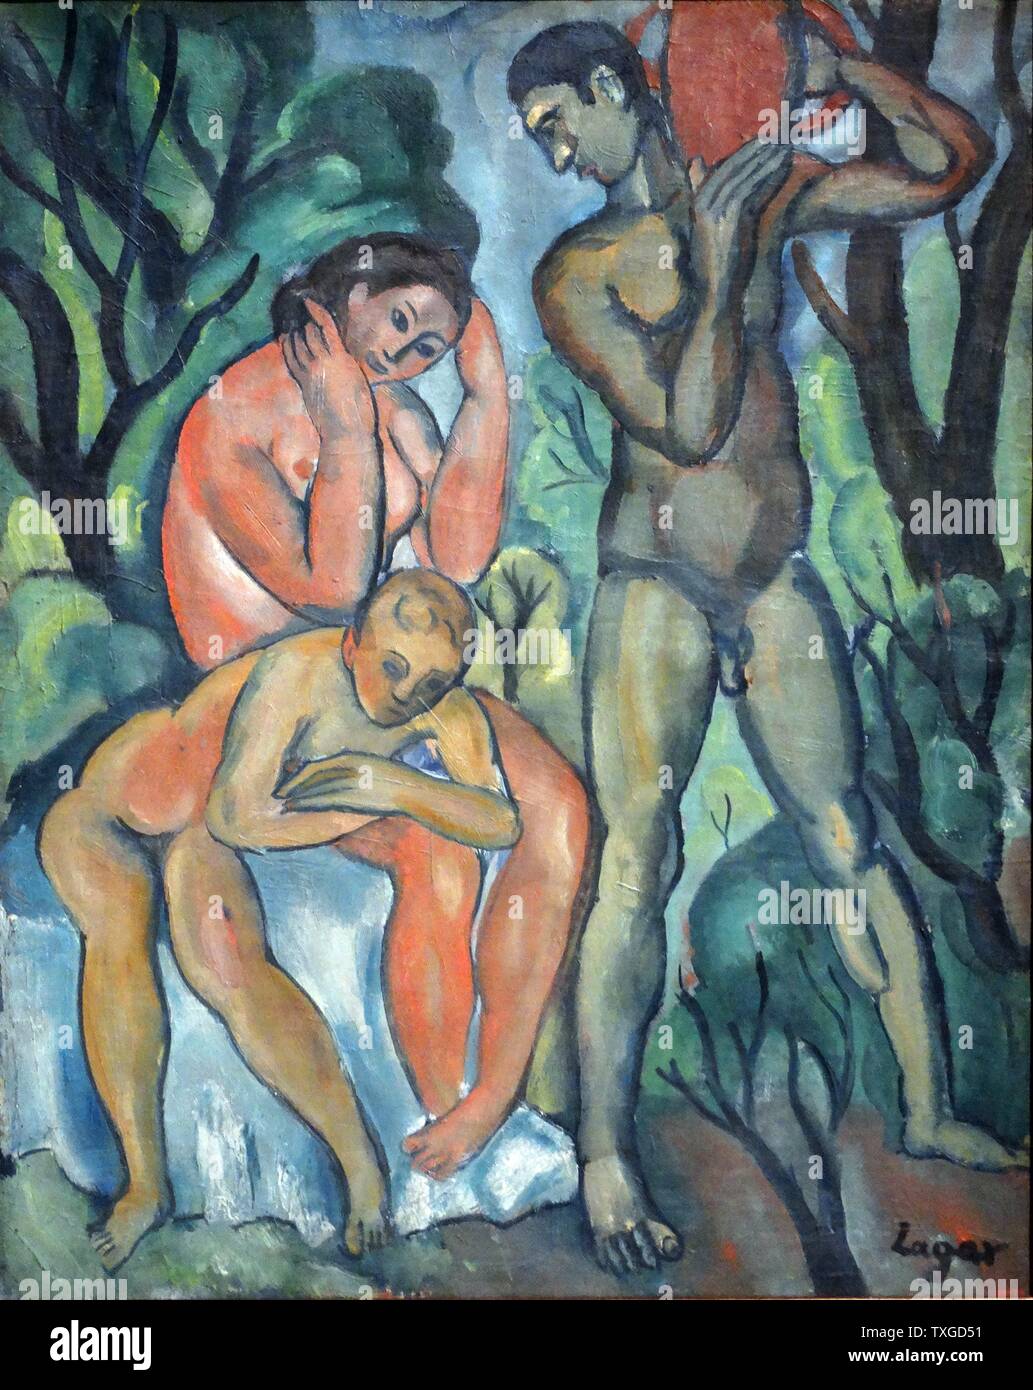 Painting titled 'pastoral' by Celso Lagar (1891-1966) Spanish expressionist painter of the school of Paris. Dated 1916 Stock Photo